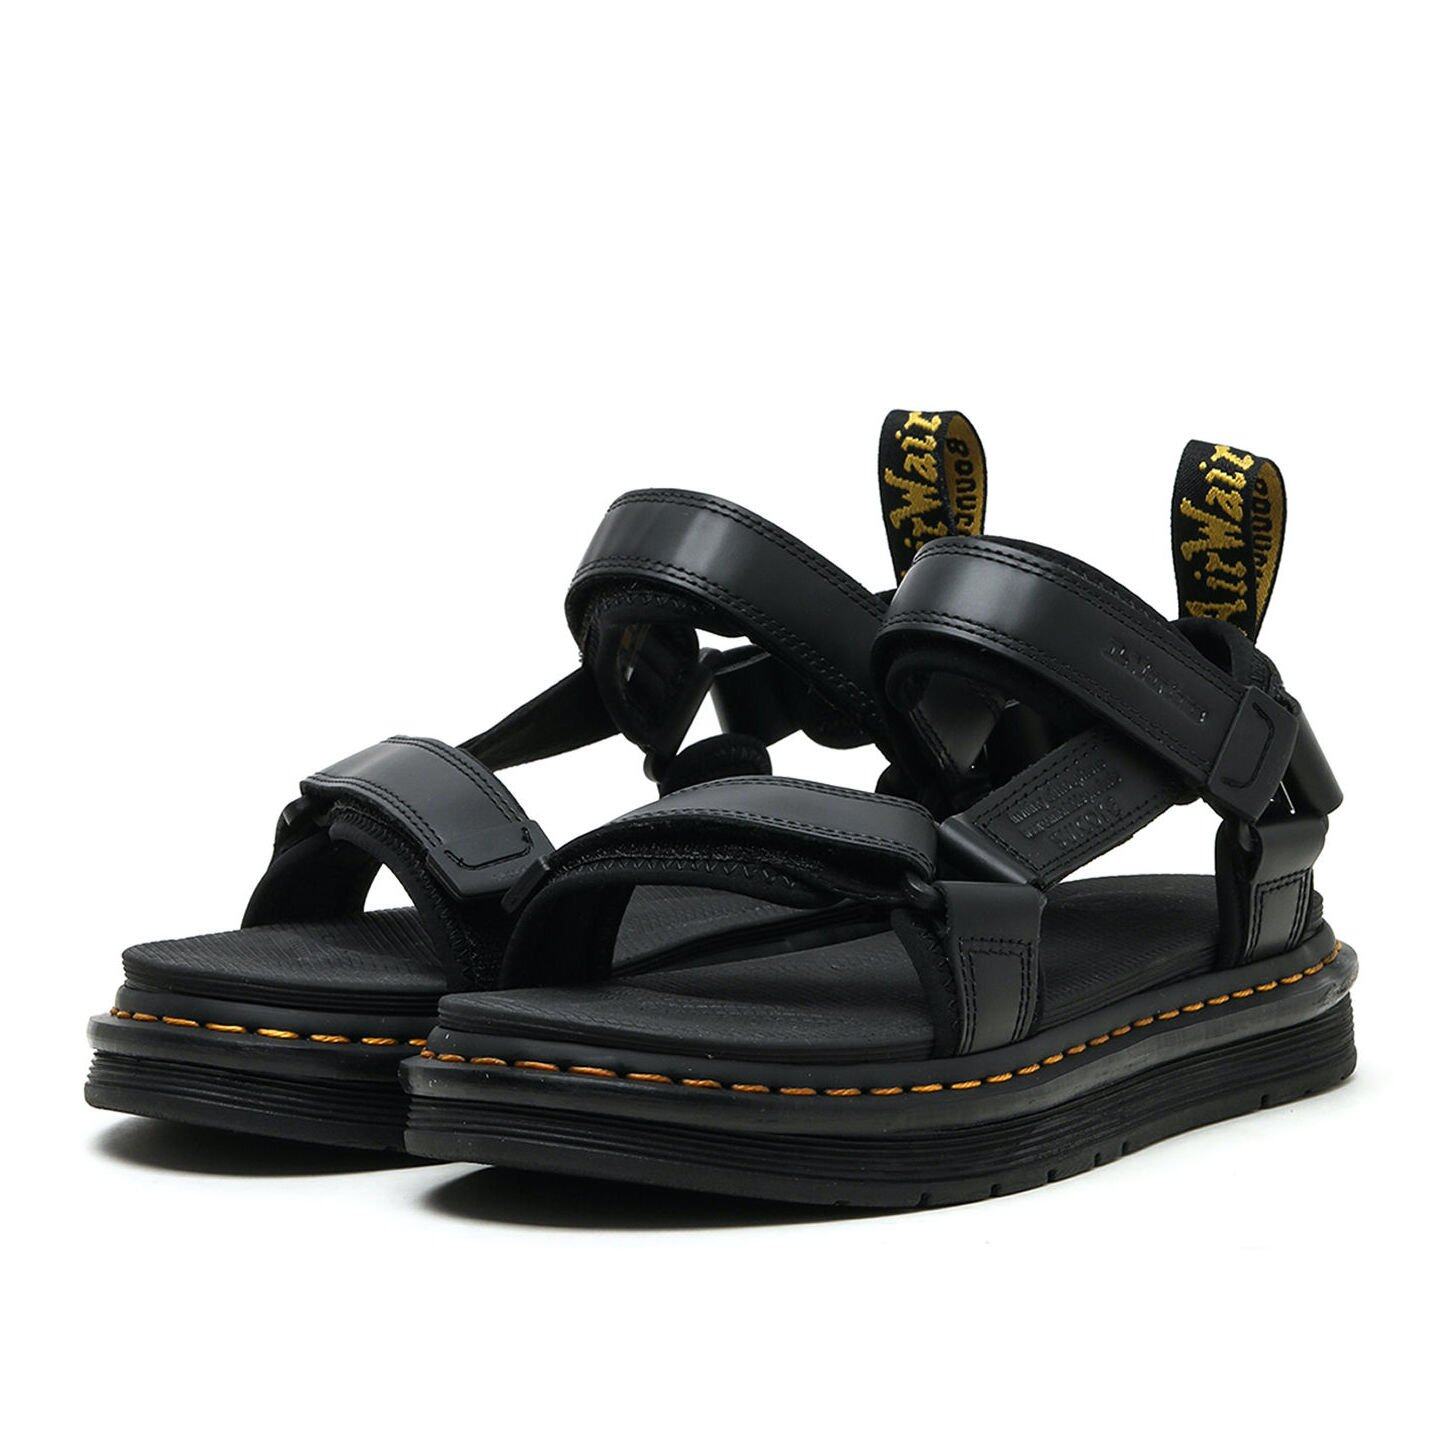 Suicoke X Dr. MArtens Two Strap Fastening Sandals